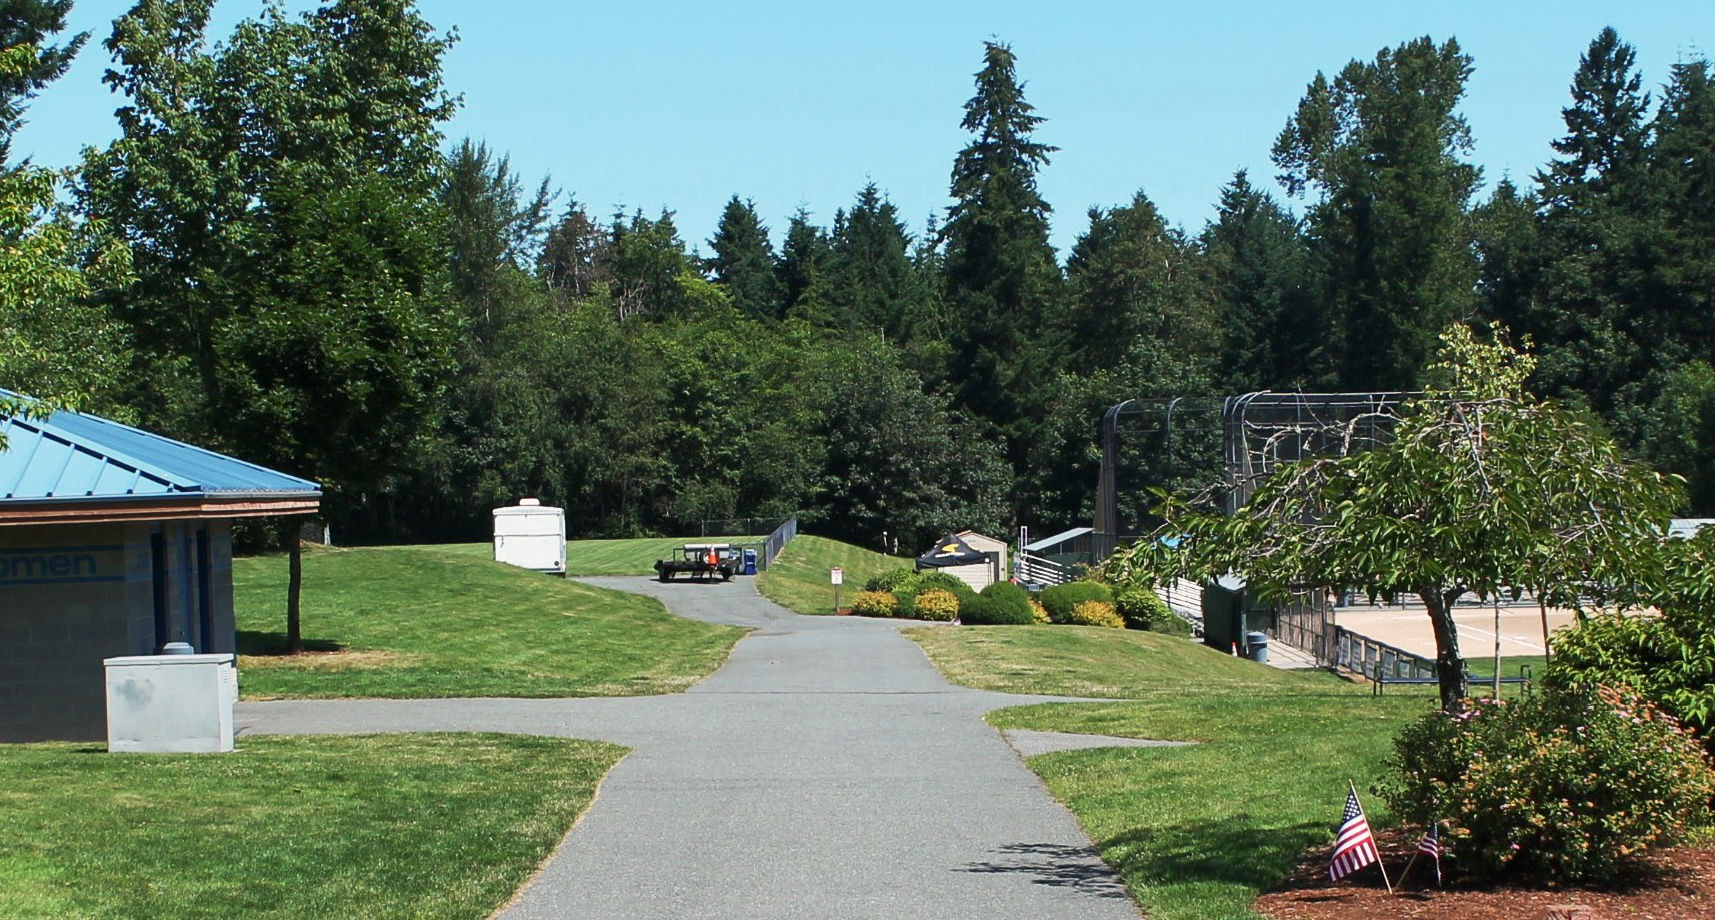 flat paved pathway at east sammamish park, leading to restrooms and a ballfield